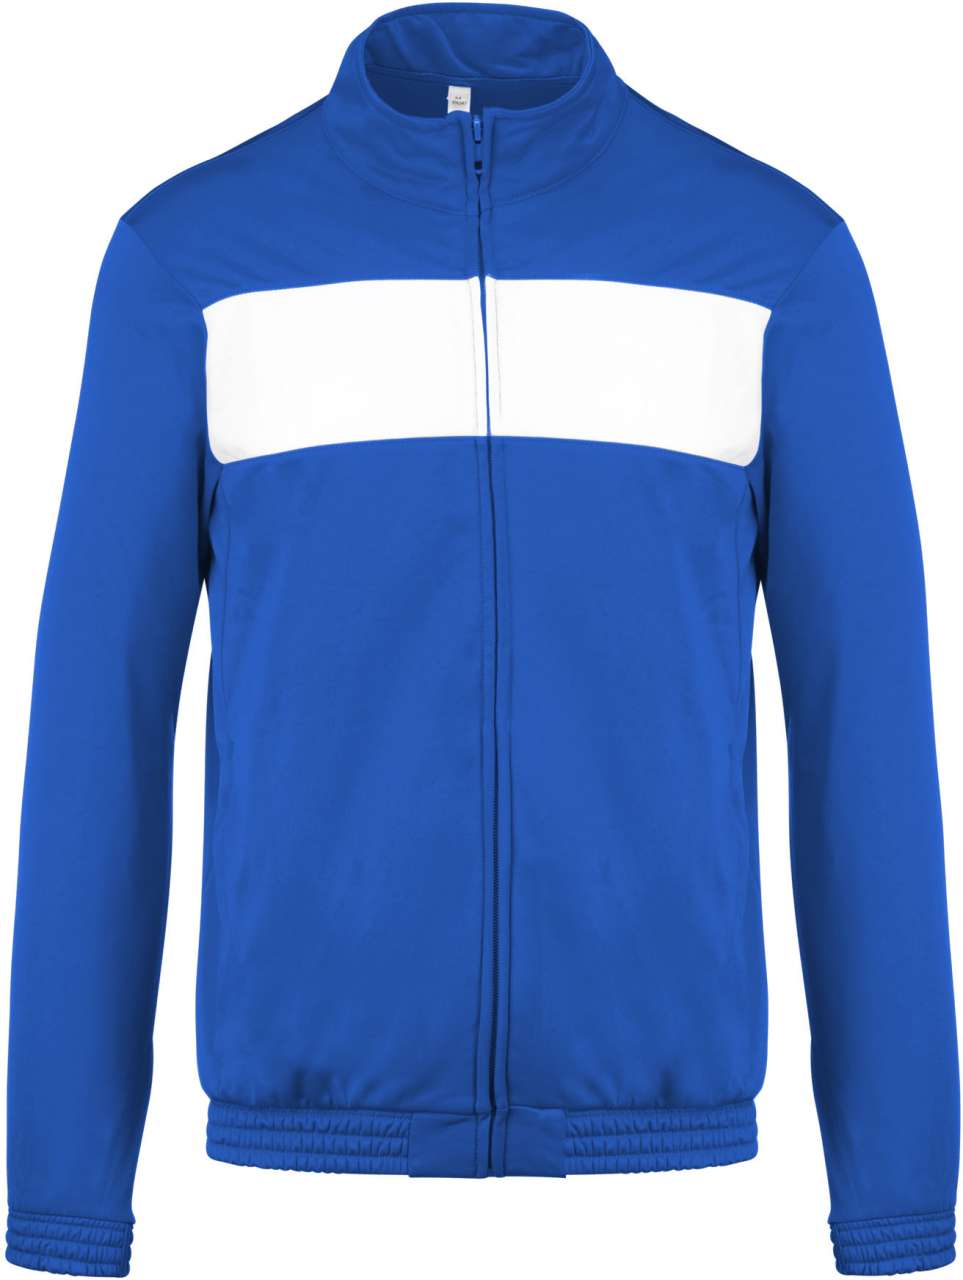 Promo  ADULT TRACKSUIT TOP